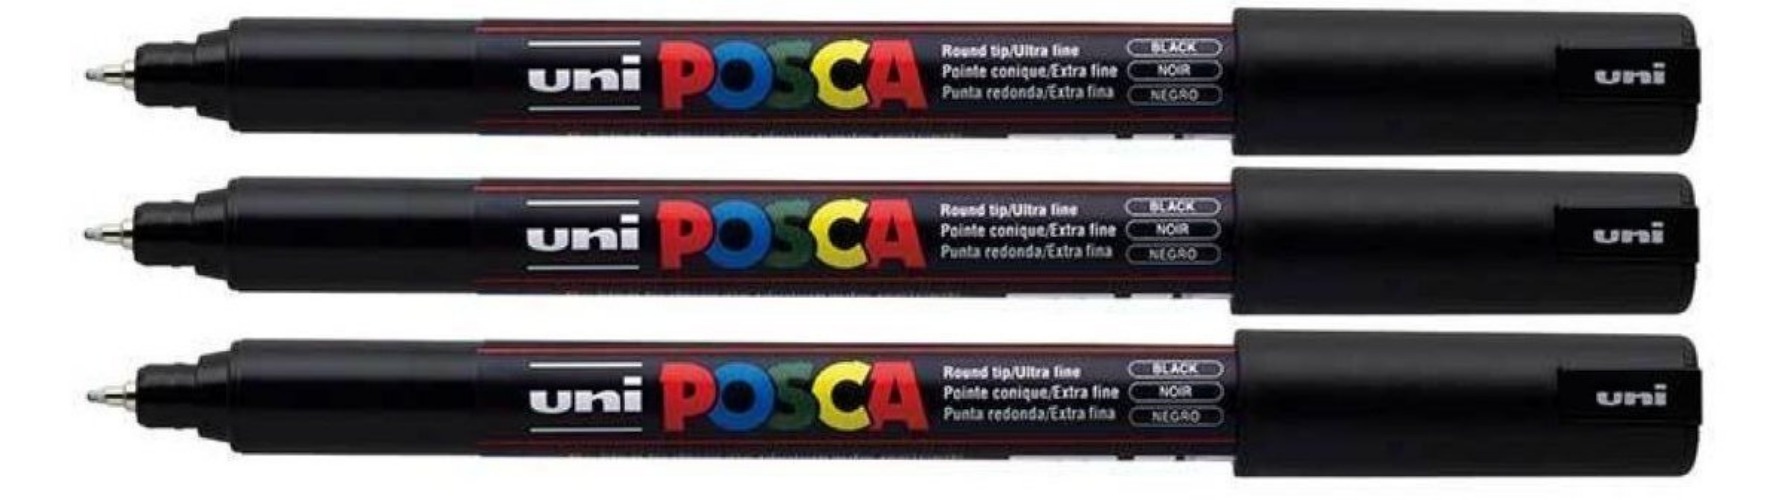 Uni Posca PC-1MR Black Colour Paint Marker Pens Ultra Fine 0.7mm Calibre Tip Nib Writes On Any Surface Glass Metal Wood Plastic Fabric (Pack of 3) - Pack Of 3